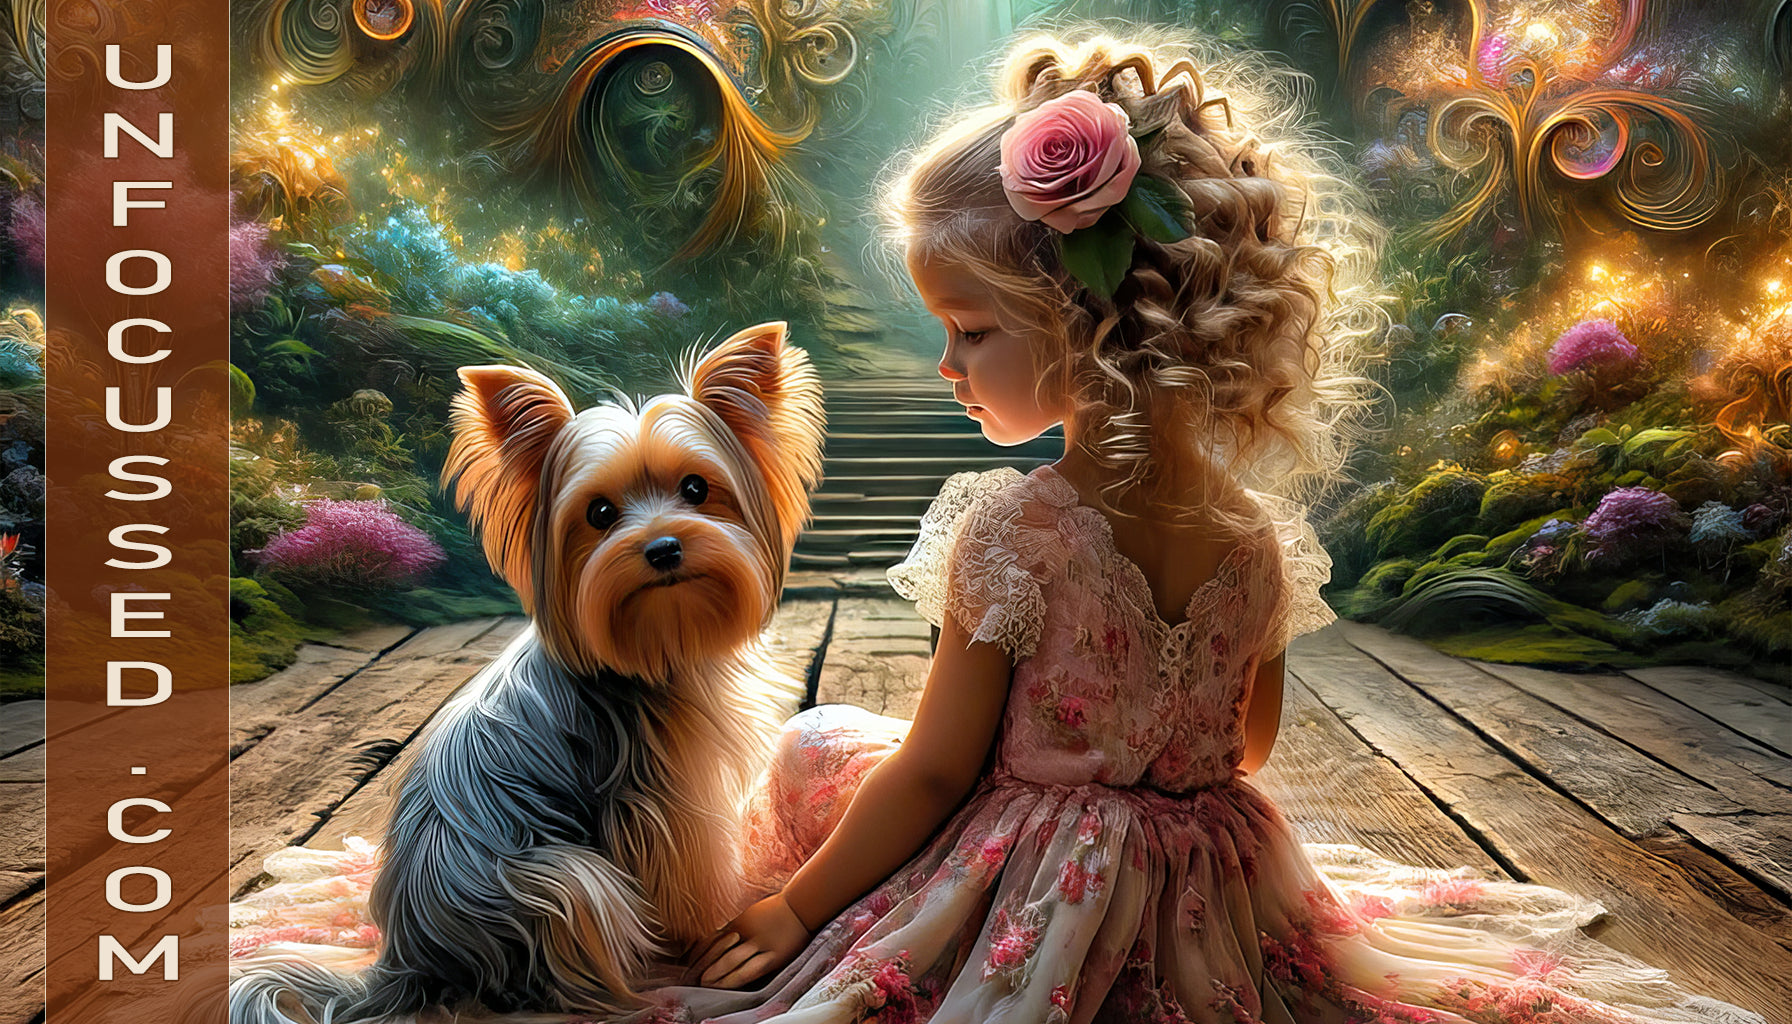 A Yorkie's Tale in the Enchanted Garden